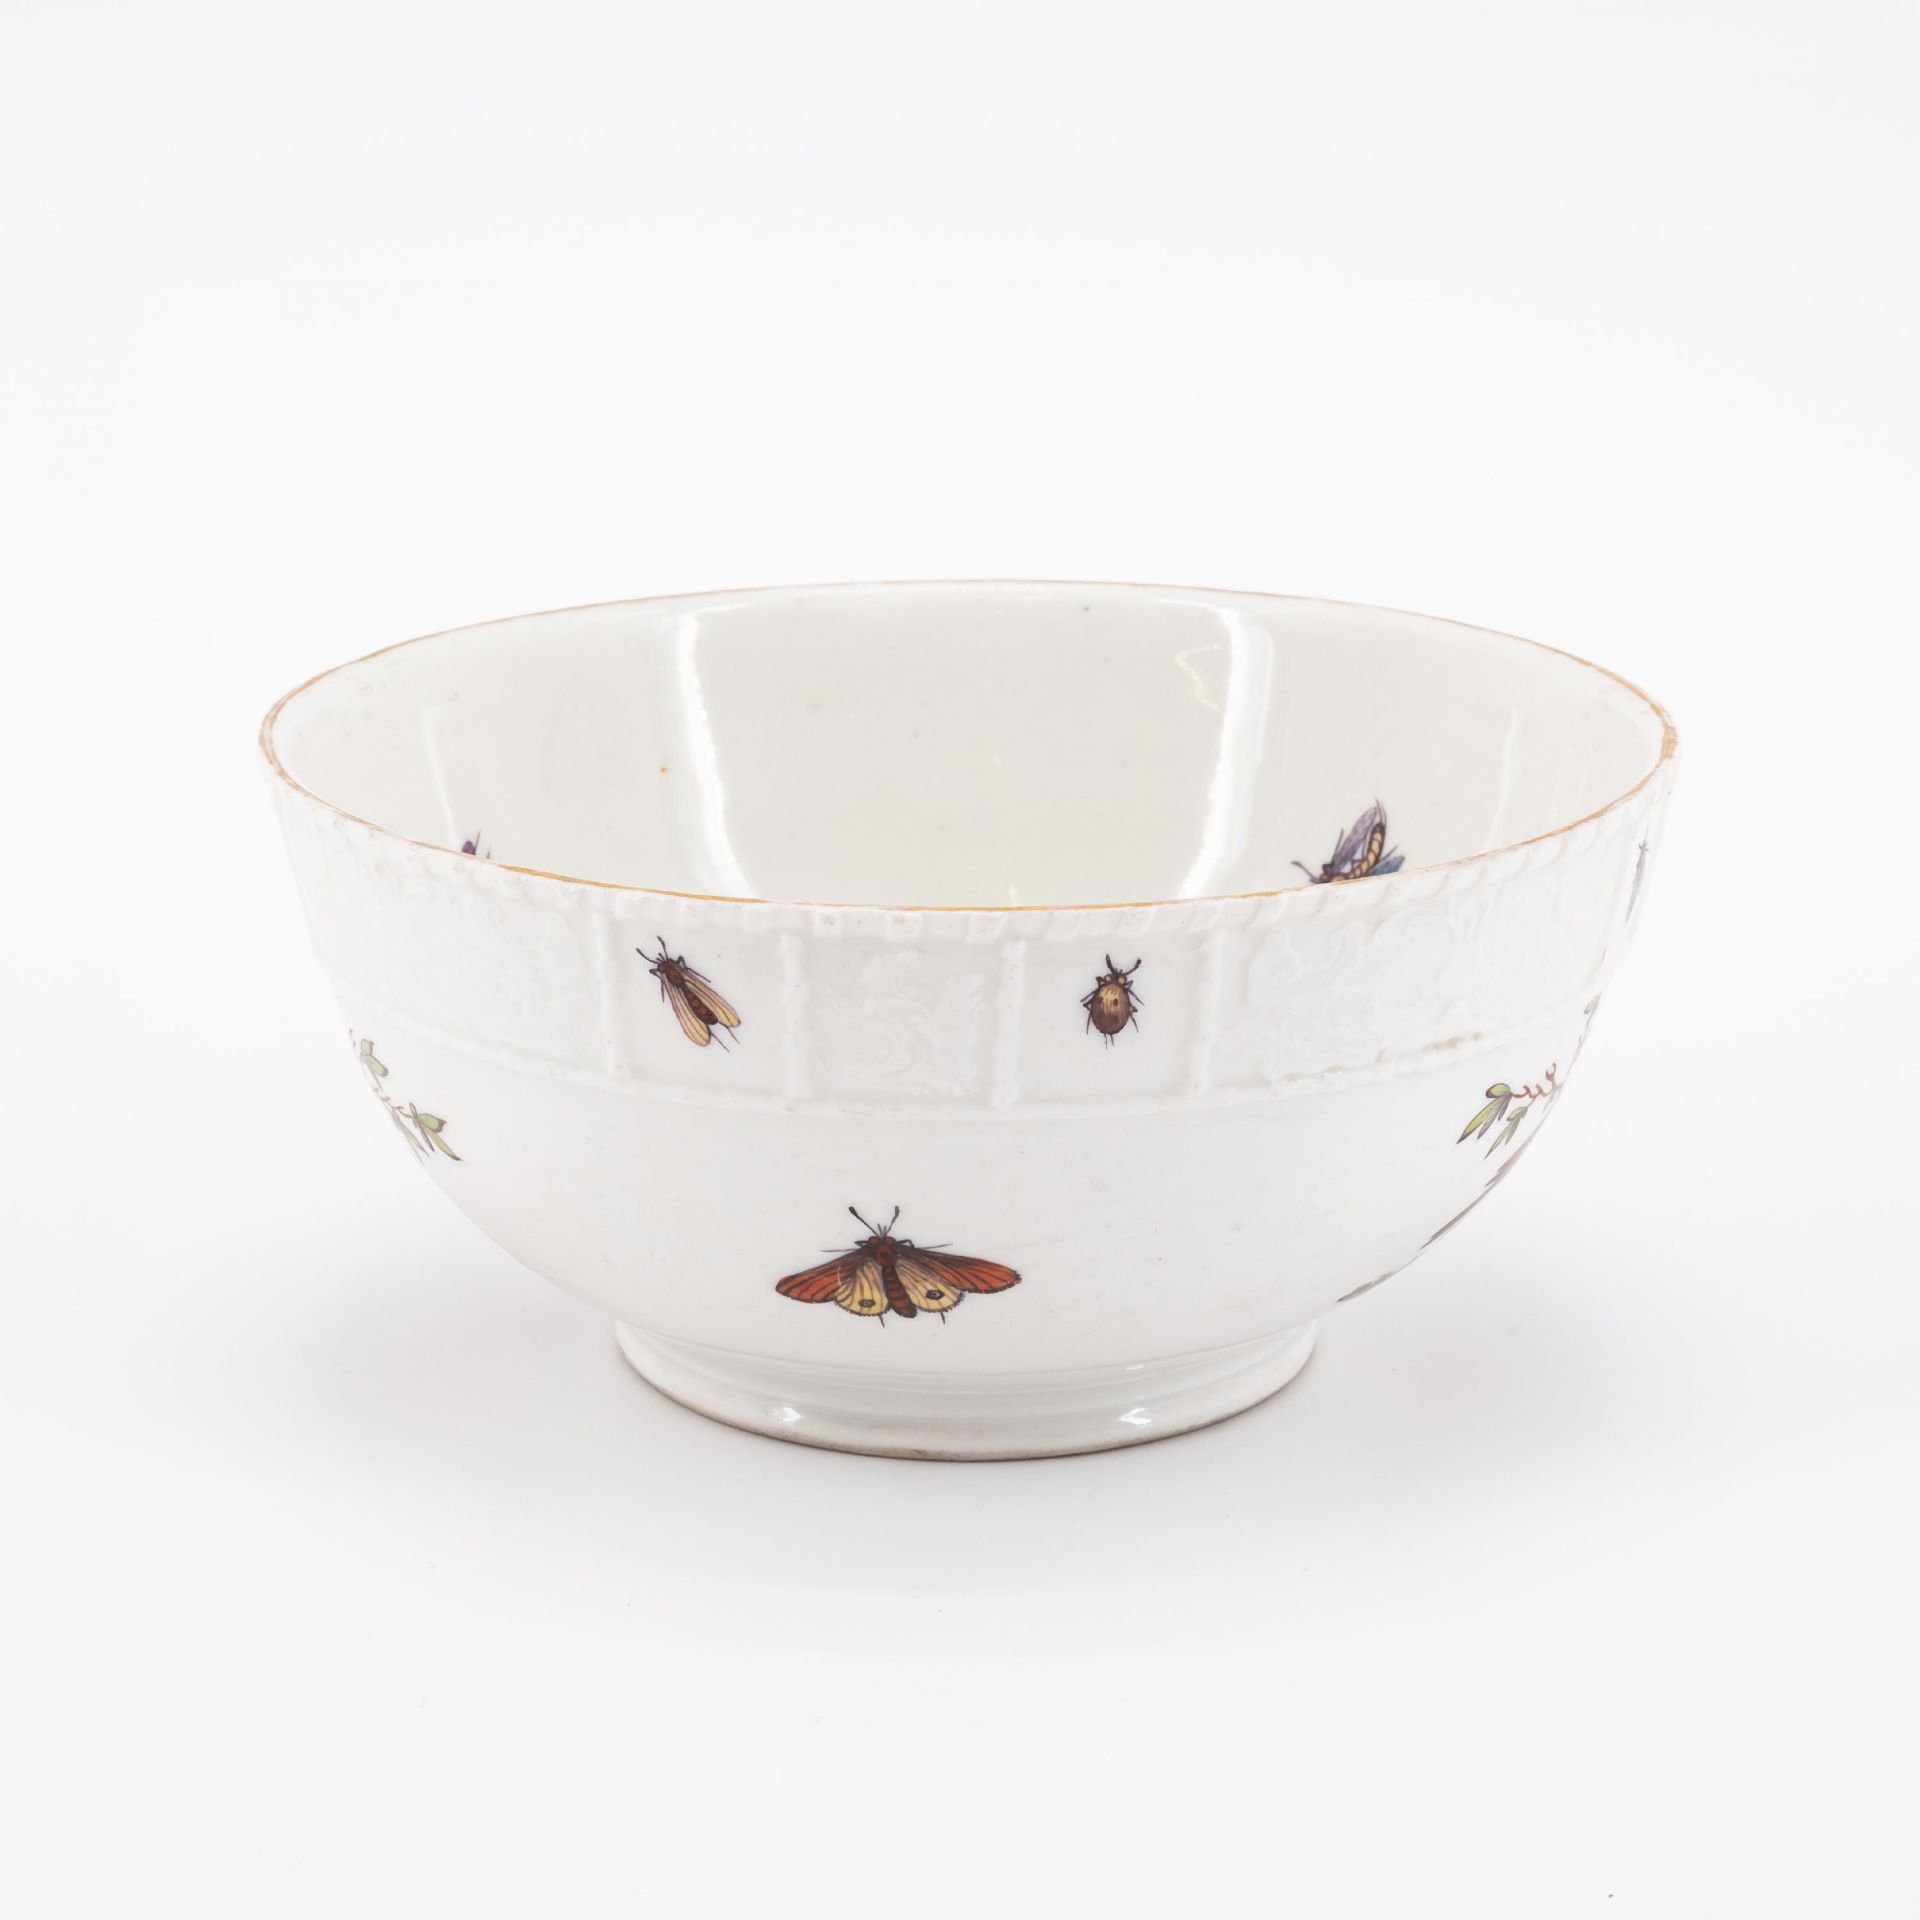 PORCELAIN SLOP BOWL, THREE CUPS AND SAUCERS WITH FIGURATIVE AND FLORAL DECOR - Image 18 of 22